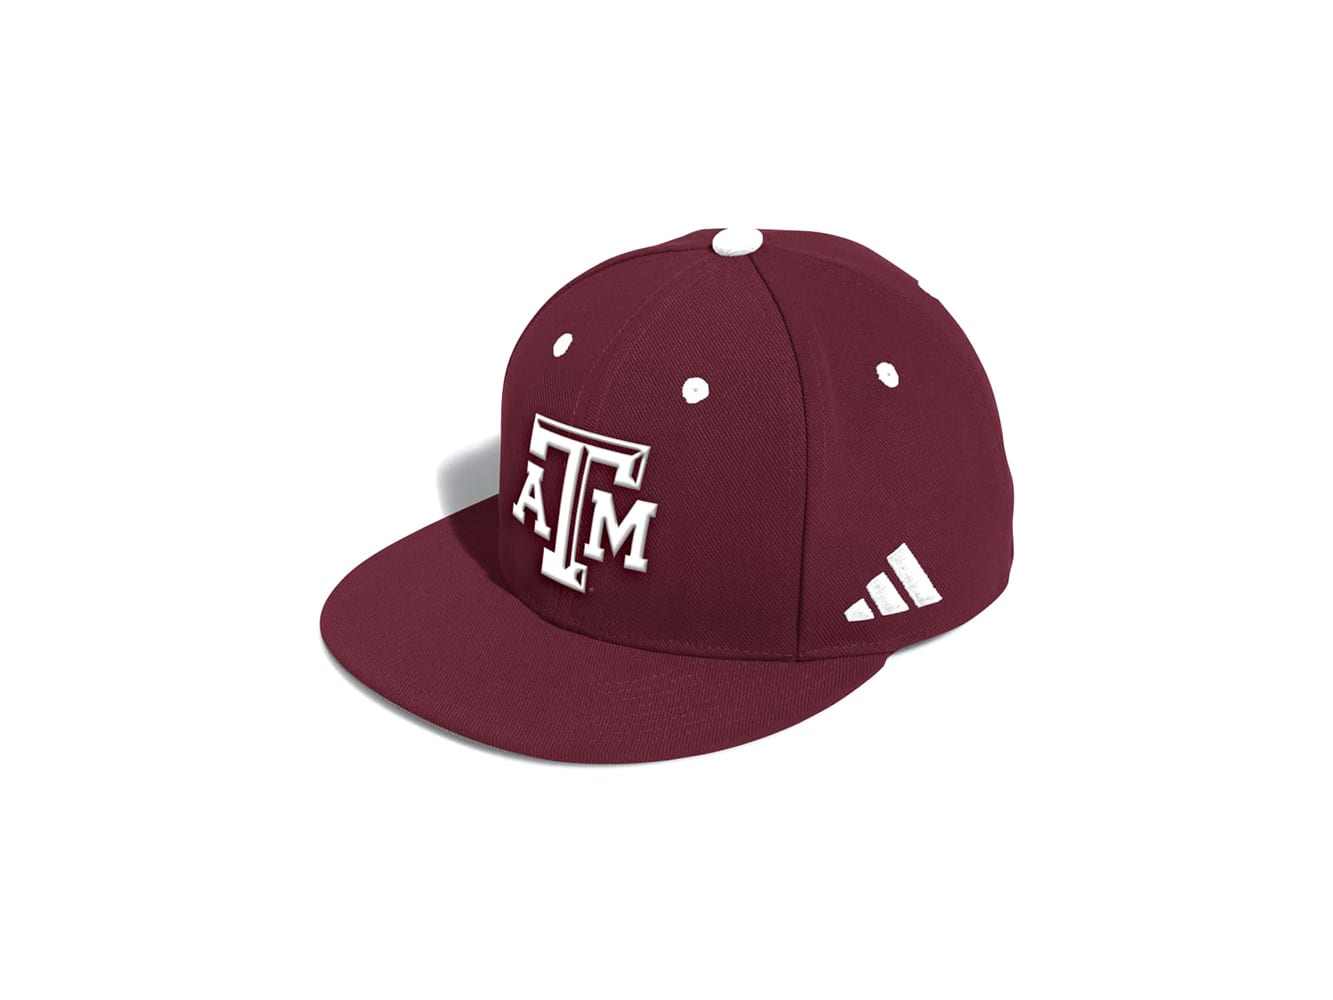 Texas A&M Classic Style Fitted Baseball Cap XL Hat 